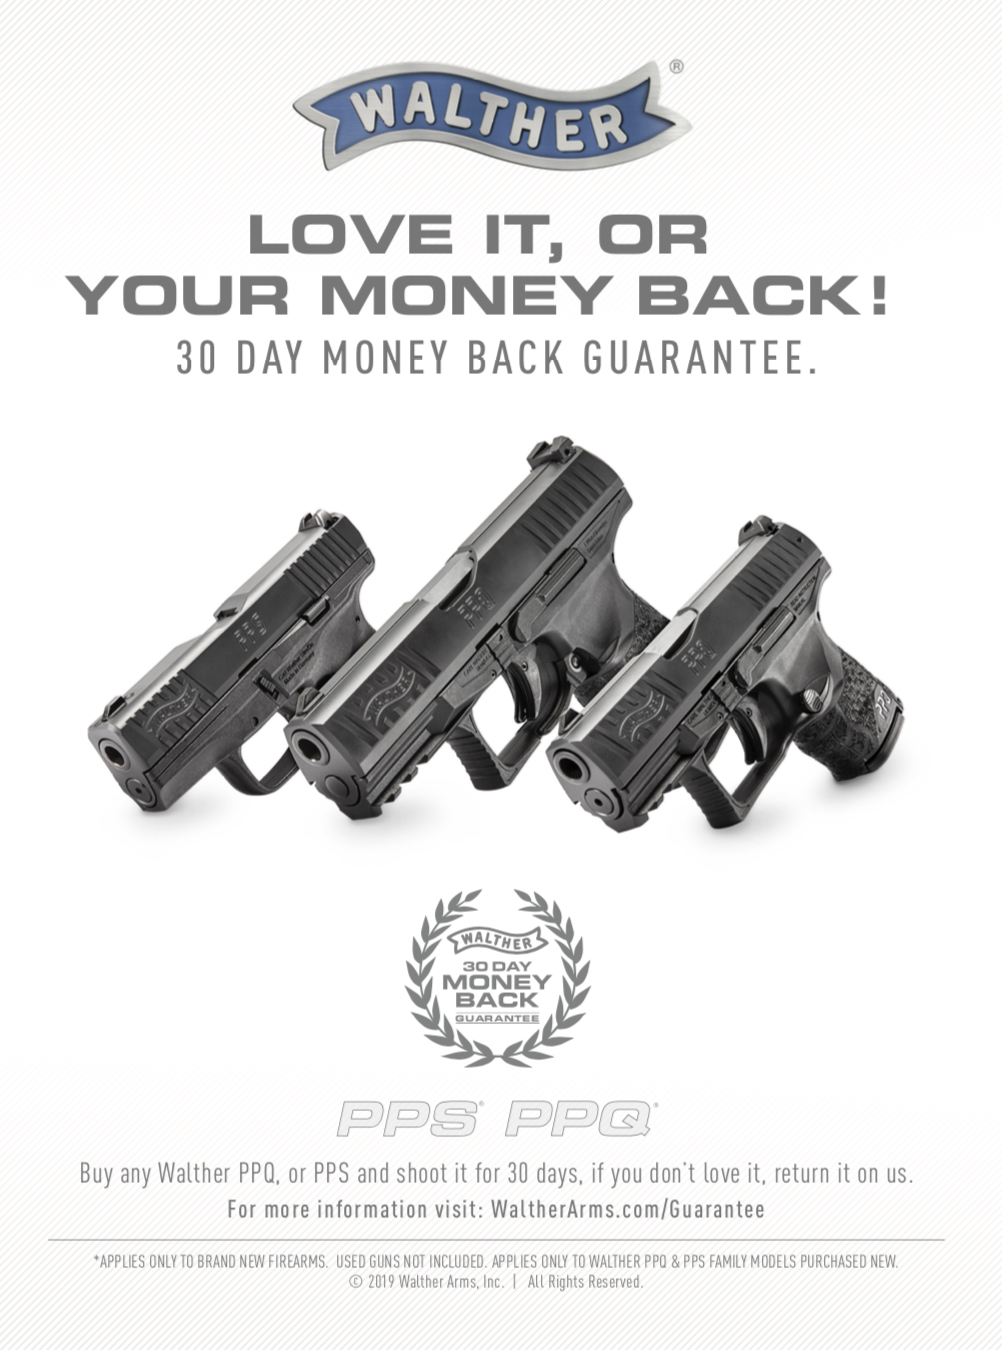 Walther Extends the Industry’s First 30-Day Money Back Guarantee to PPQ & PPS Pistols